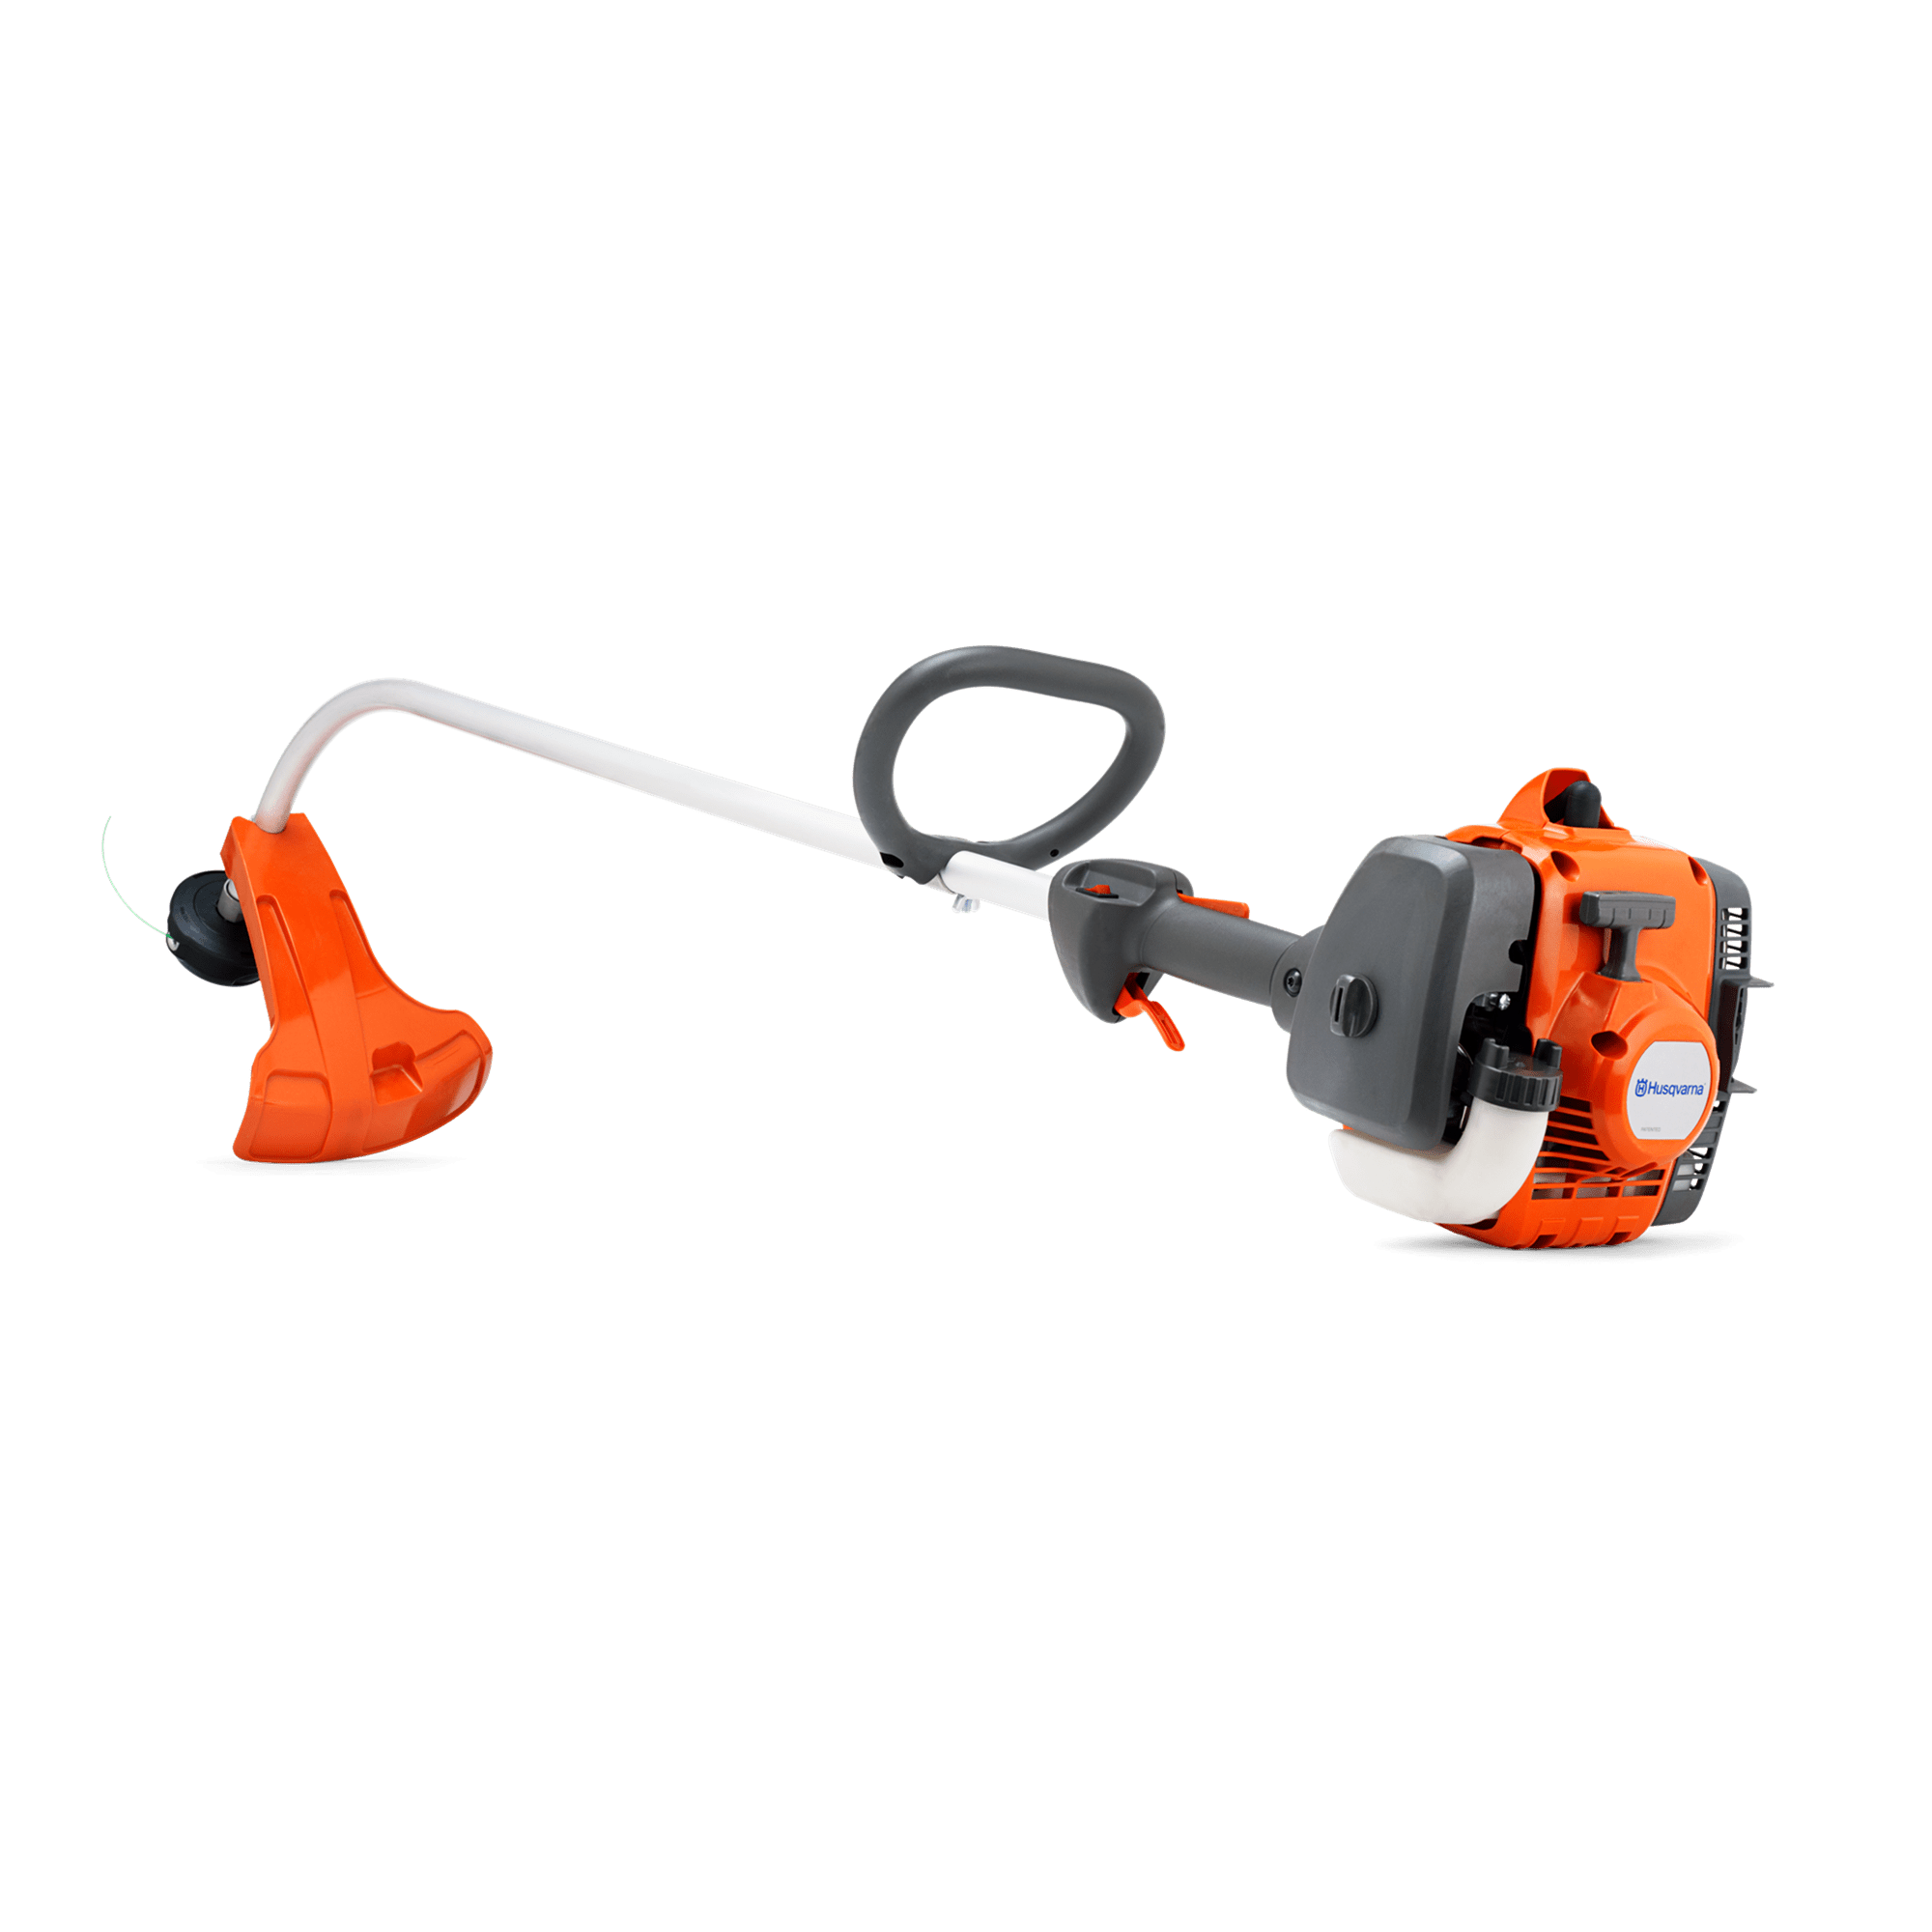 Image for 122C Gas Curved Shaft String Trimmer                                                                                             from HusqvarnaB2C